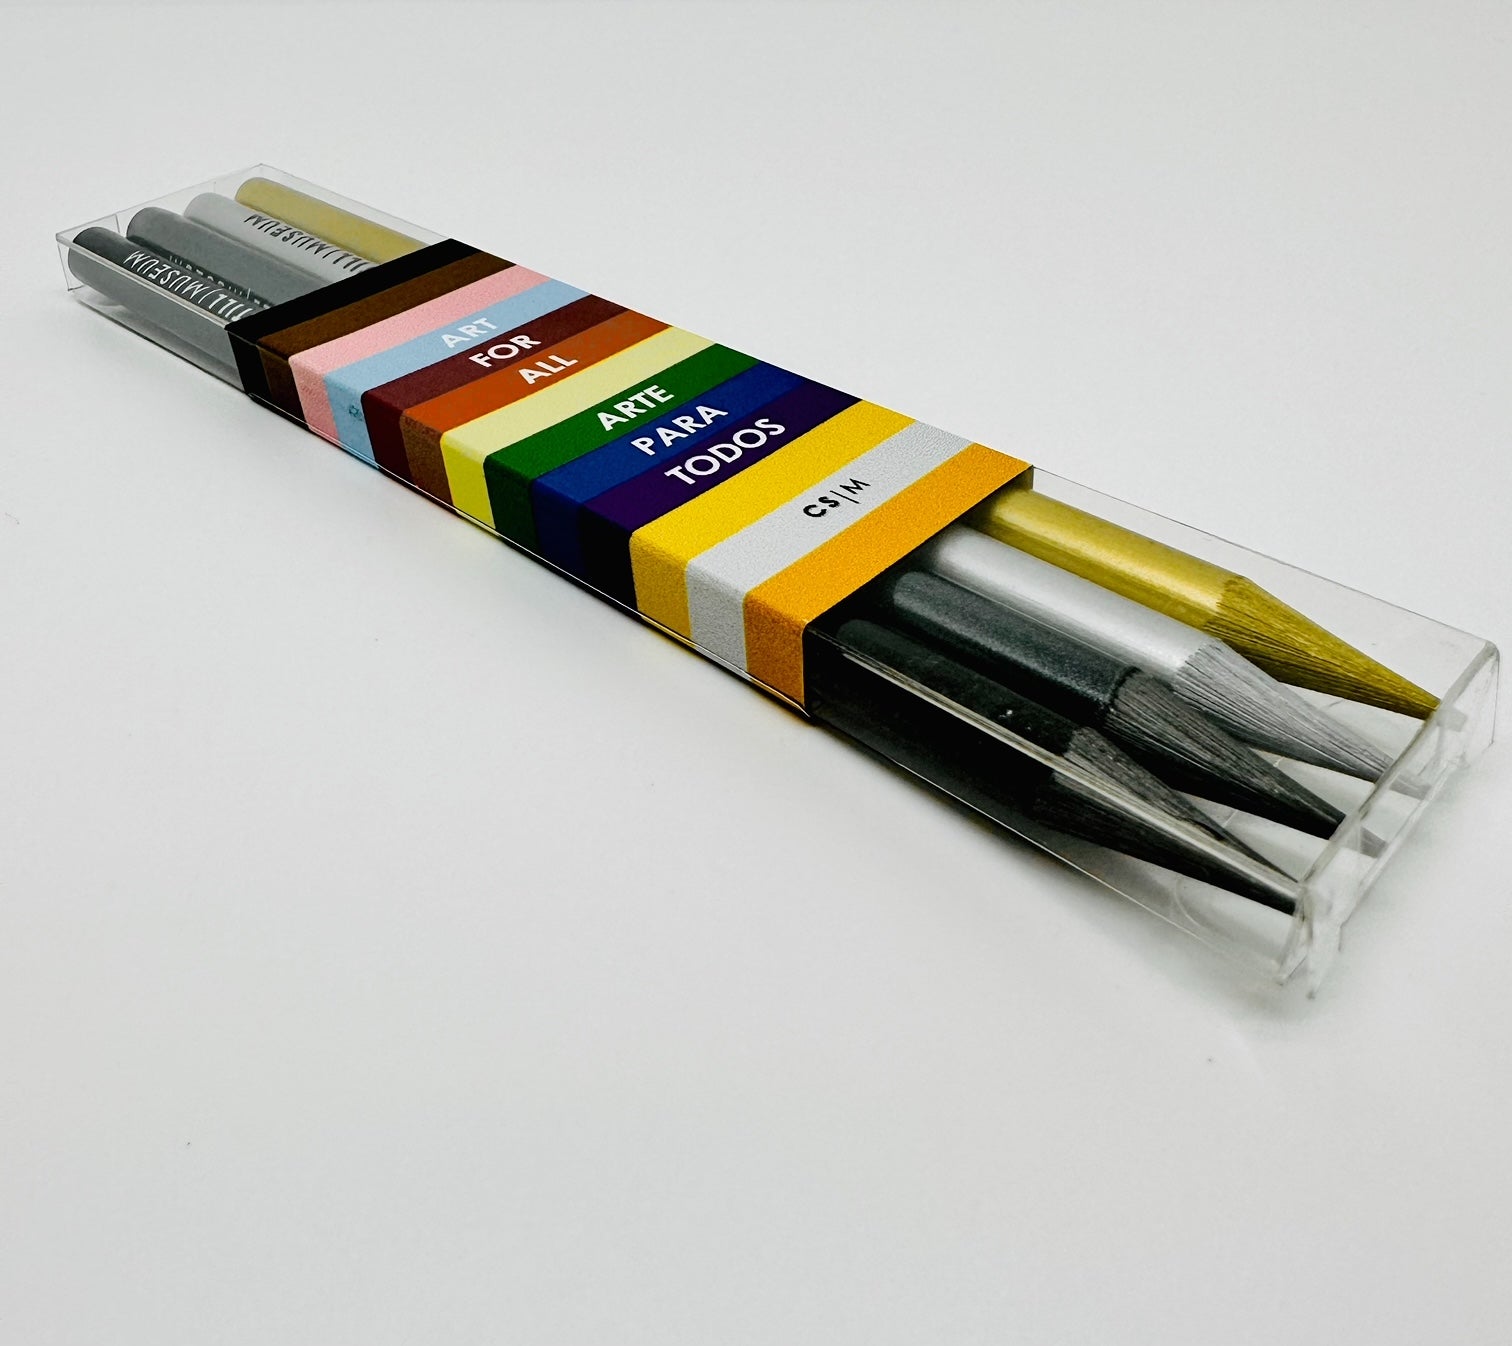 Set of four solid-woodless graphite pencils in Silver, Black, Gold, and pure color.  They come in a clear transparent package, wrapped with a rainbow belly band with the slogan “ART FOR ALL; ARTE PARA TODOS”  around the box.